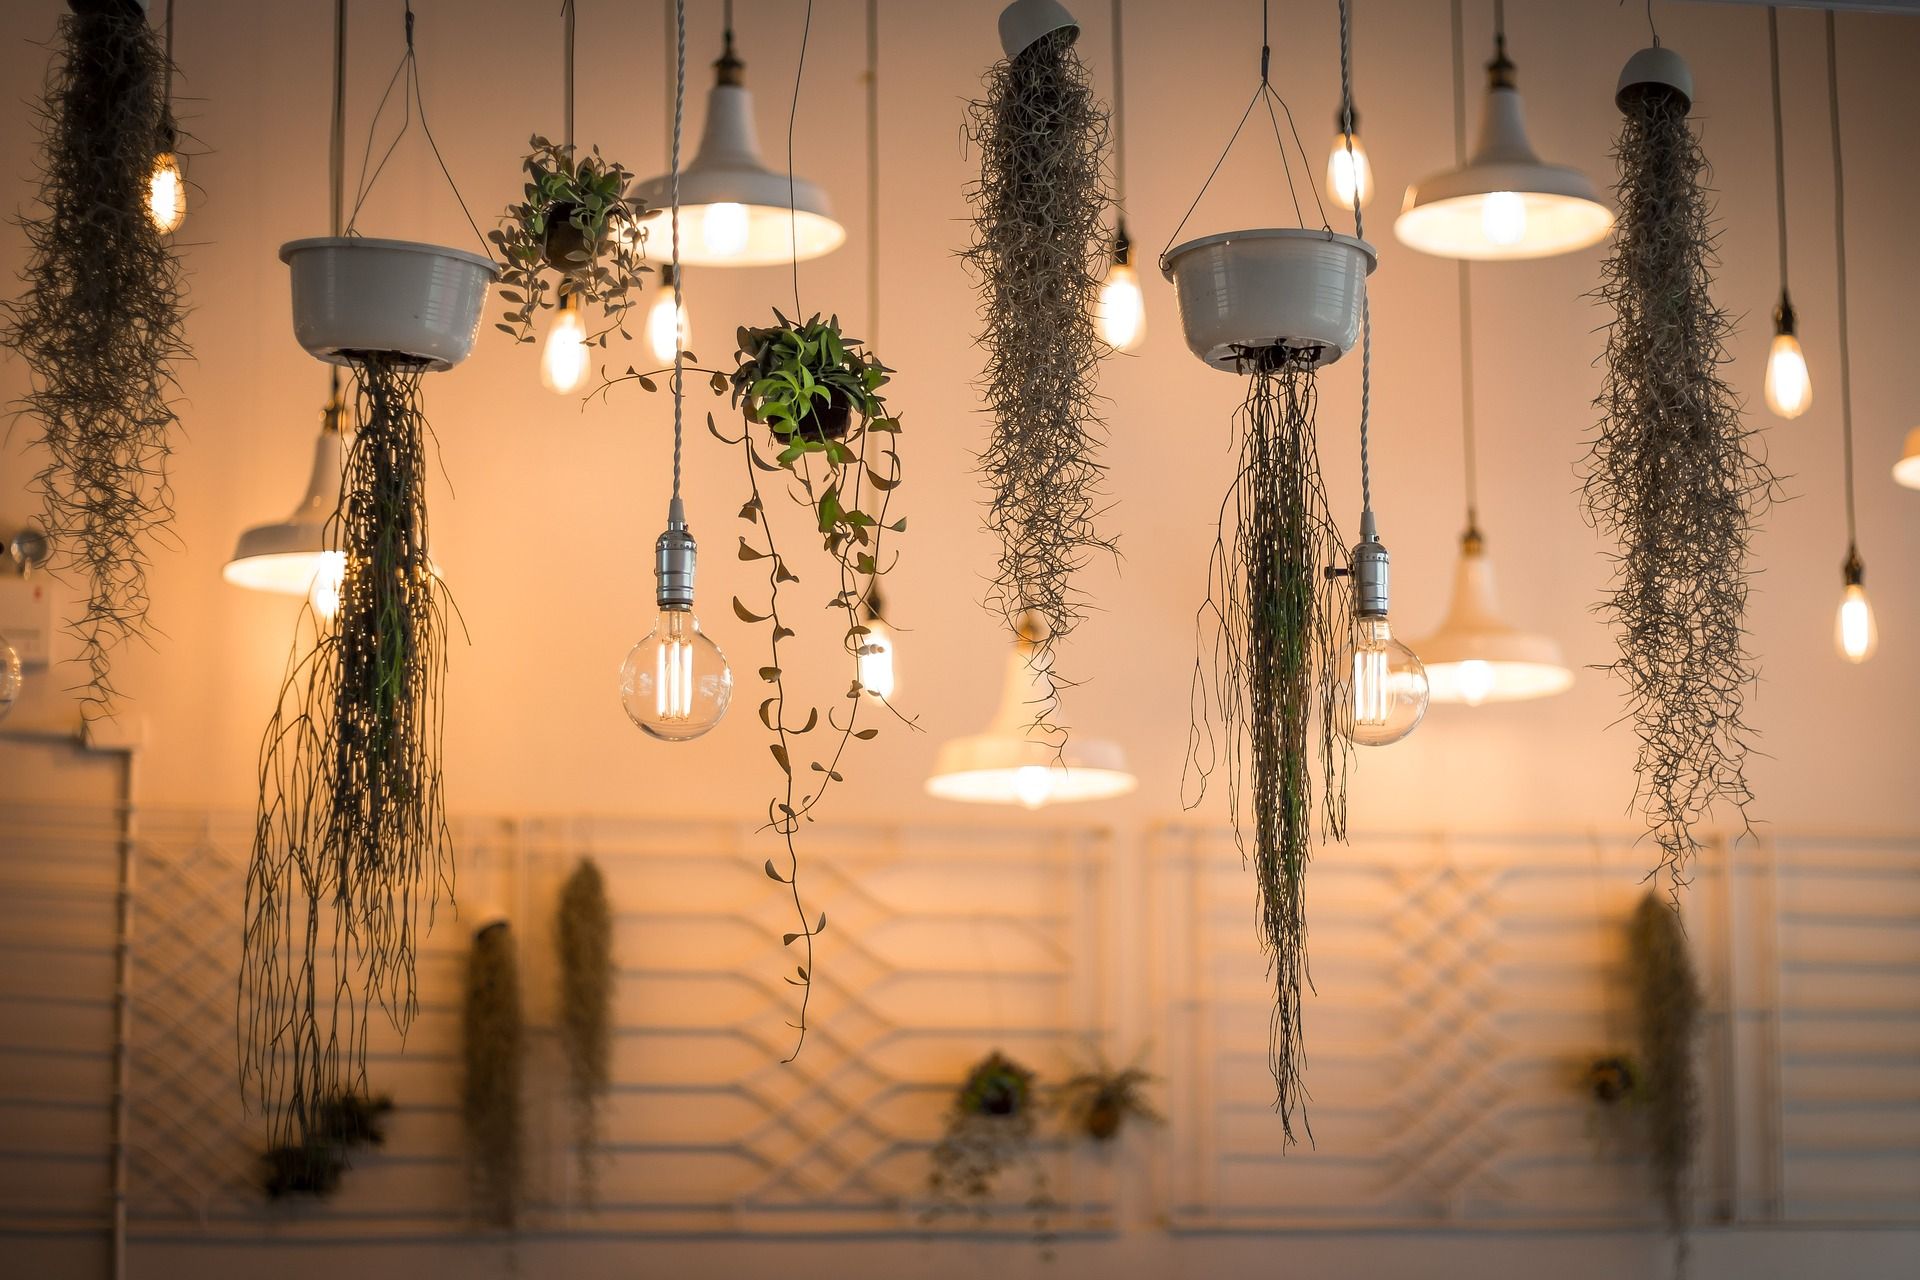 Decorating a space with the right lights and some plants